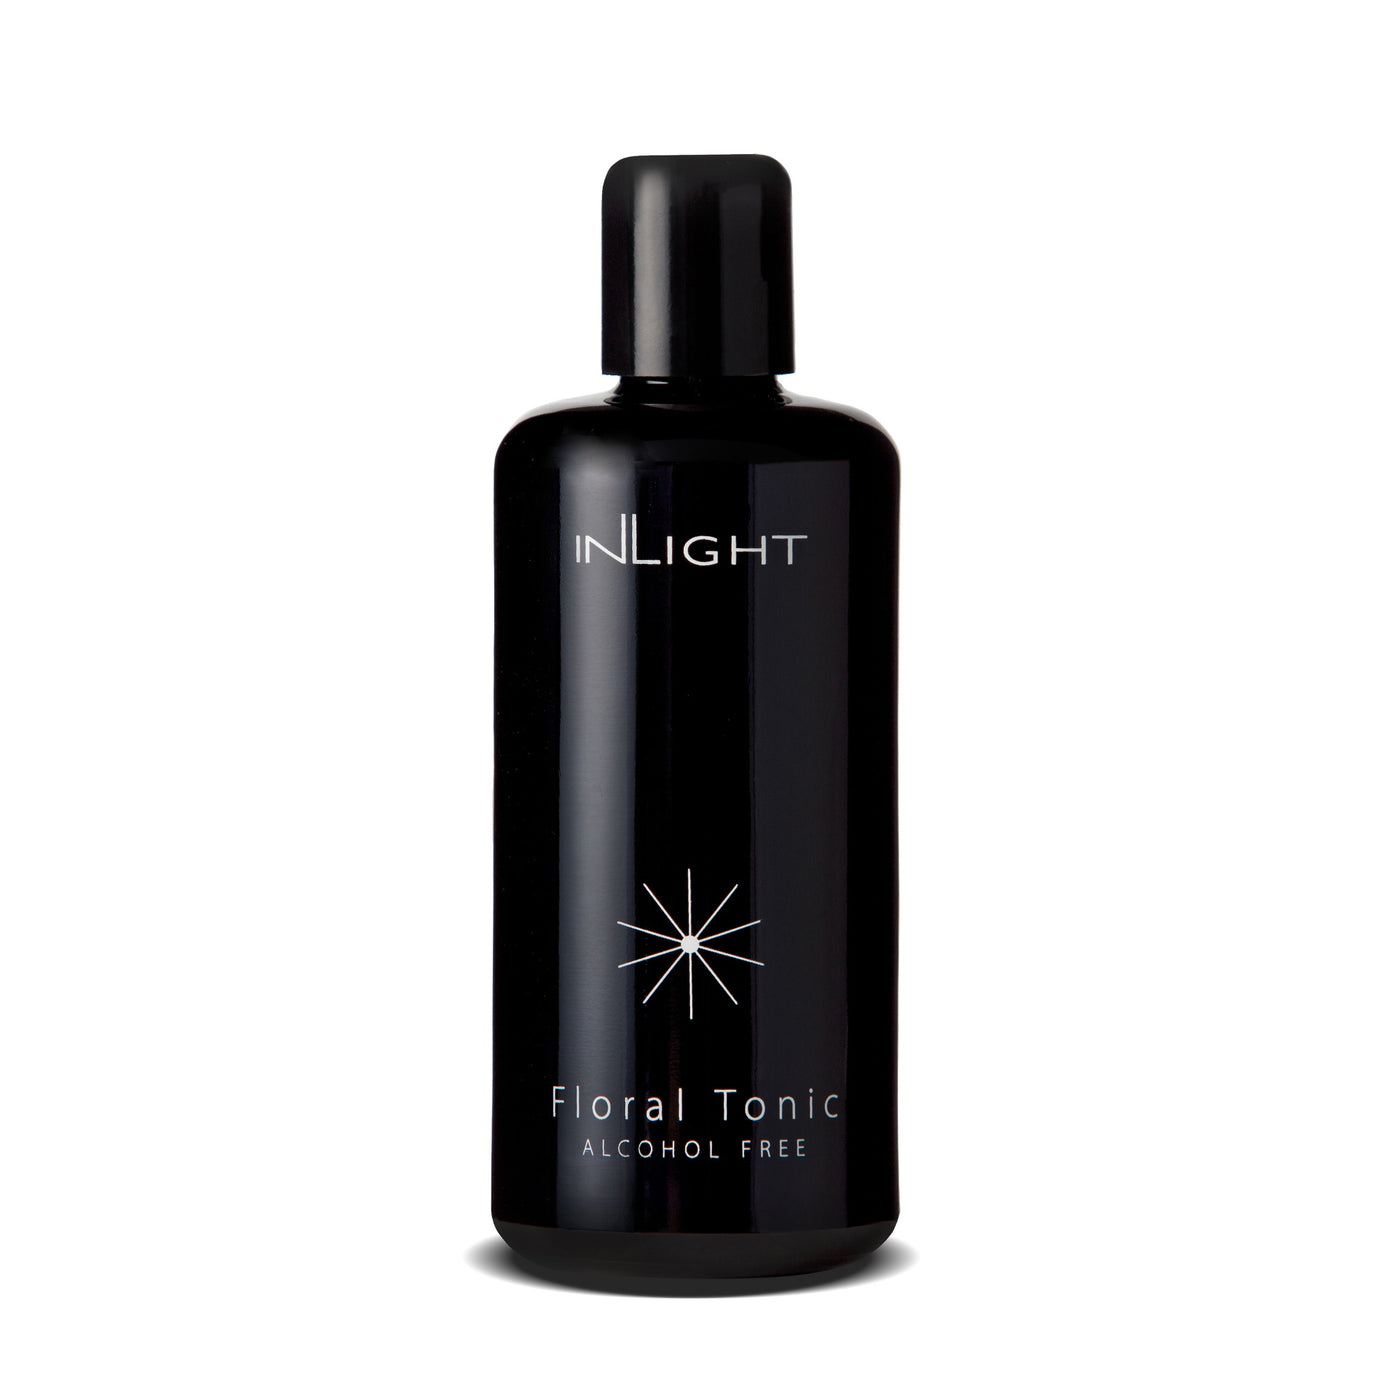 Inlight Floral Tonic